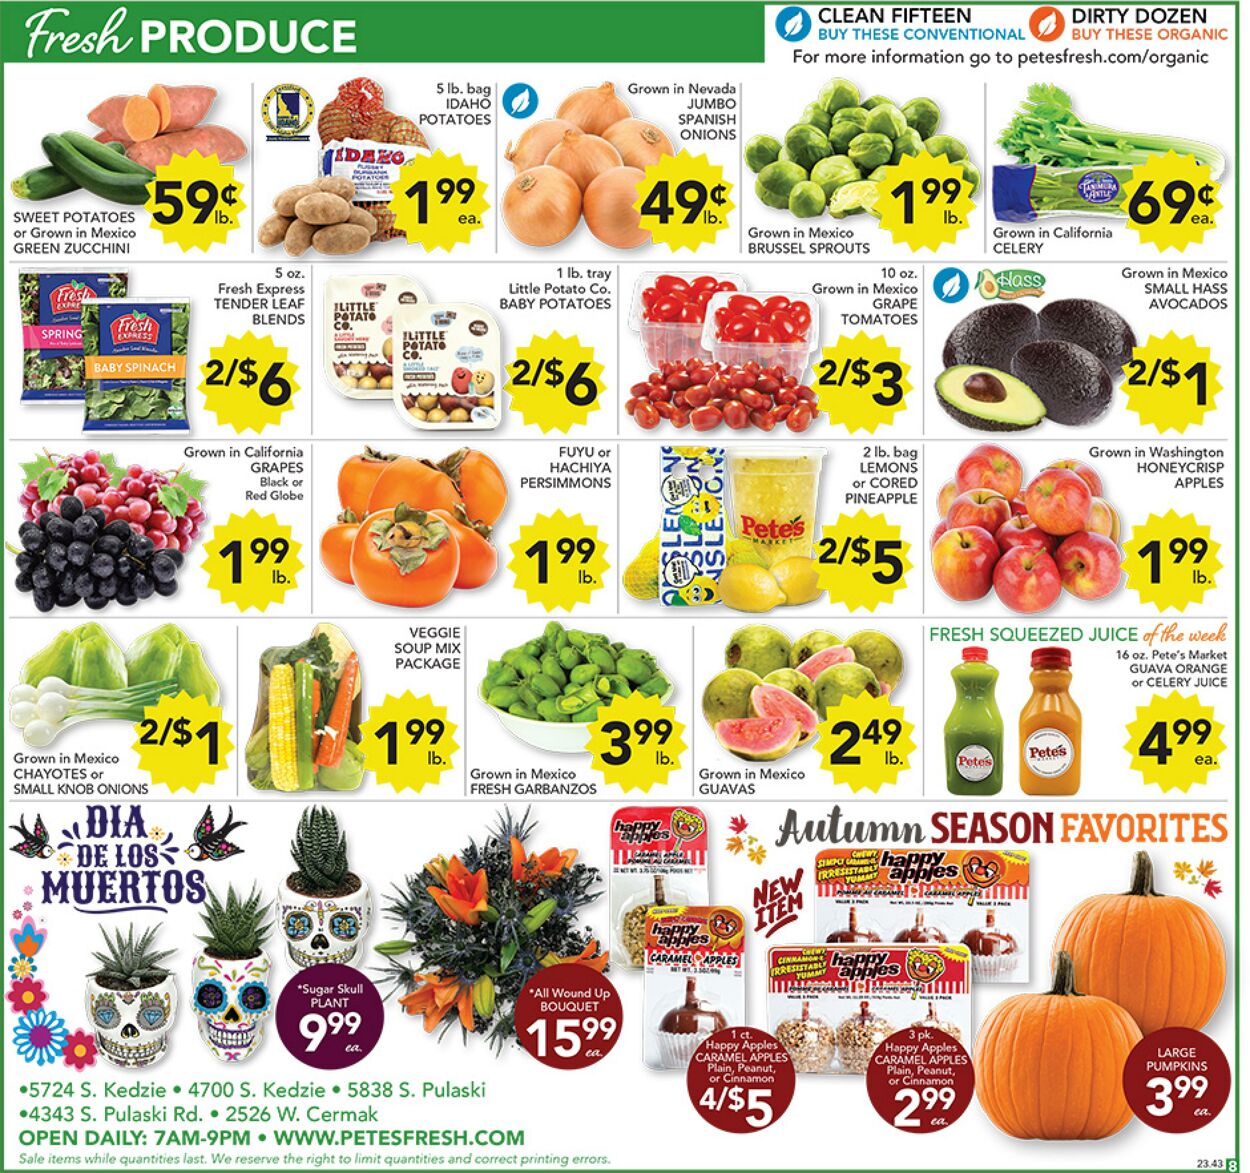 Weekly ad Pete's Fresh Market 10/25/2023 - 10/31/2023